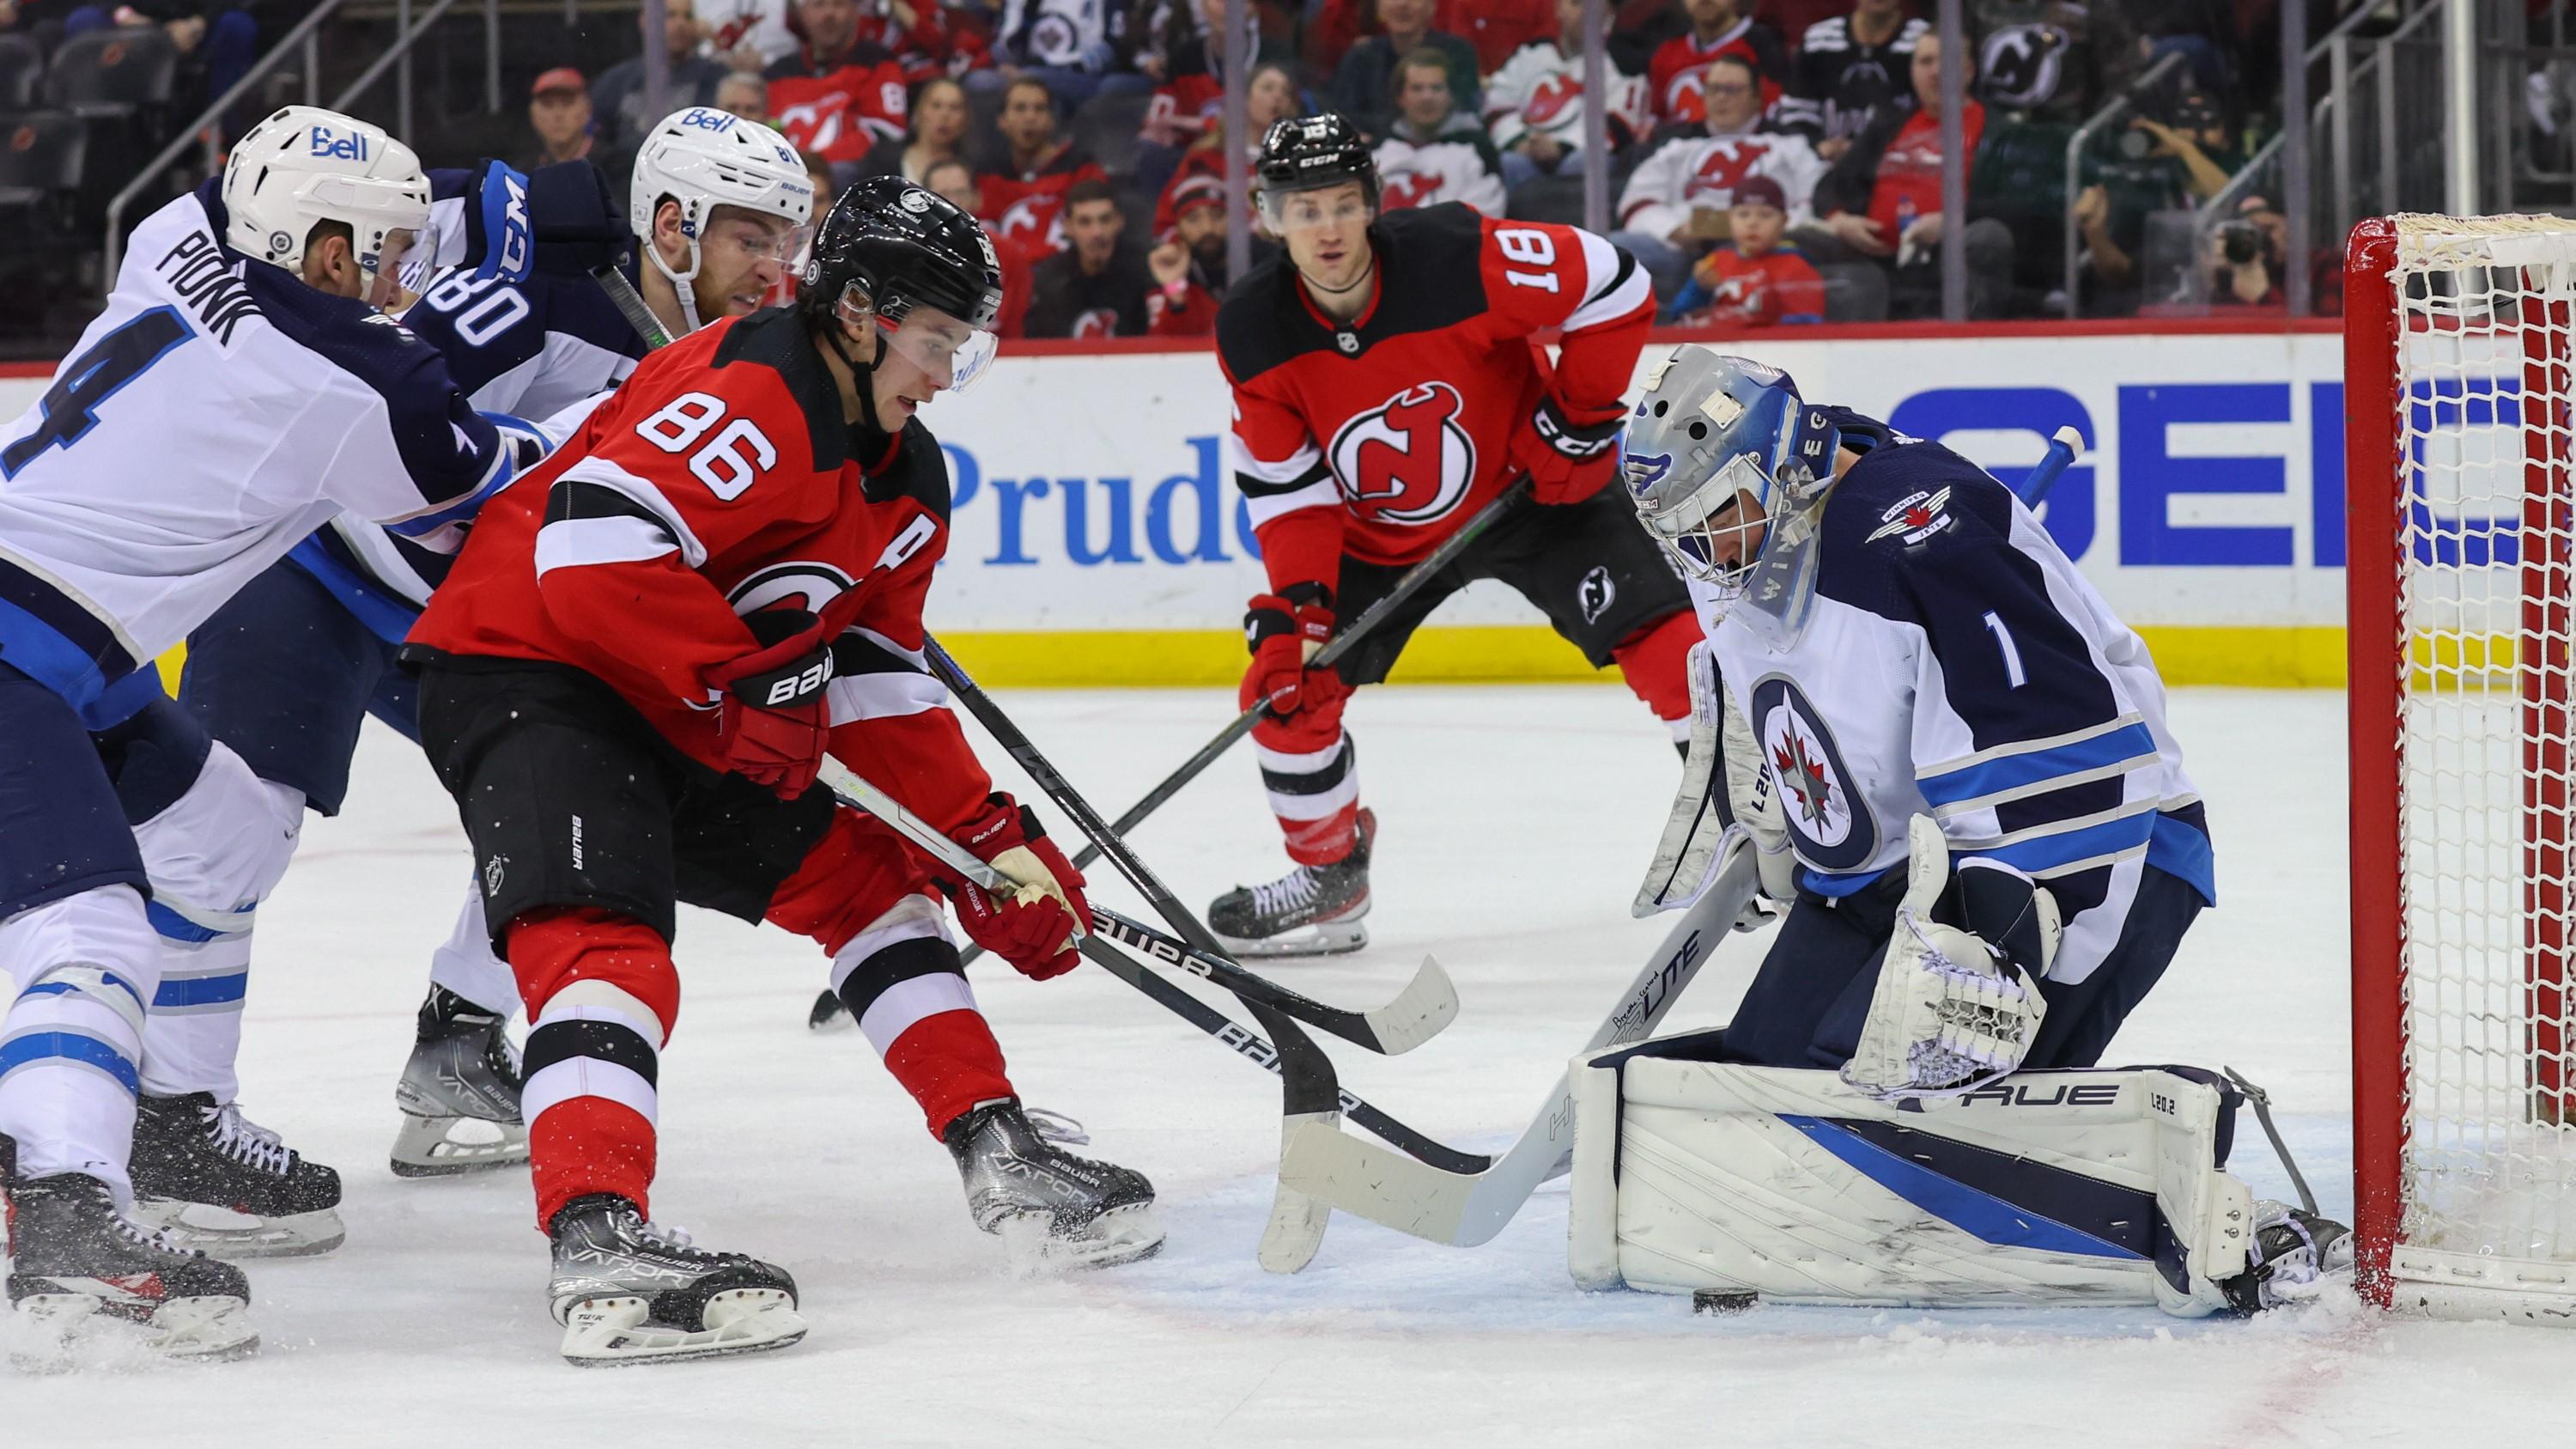 Mar 10, 2022; Newark, New Jersey, USA; Winnipeg Jets goaltender Eric Comrie (1) makes a save on New Jersey Devils center Jack Hughes (86) during the second period at Prudential Center. Mandatory Credit: Ed Mulholland-USA TODAY Sports / Ed Mulholland-USA TODAY Sports